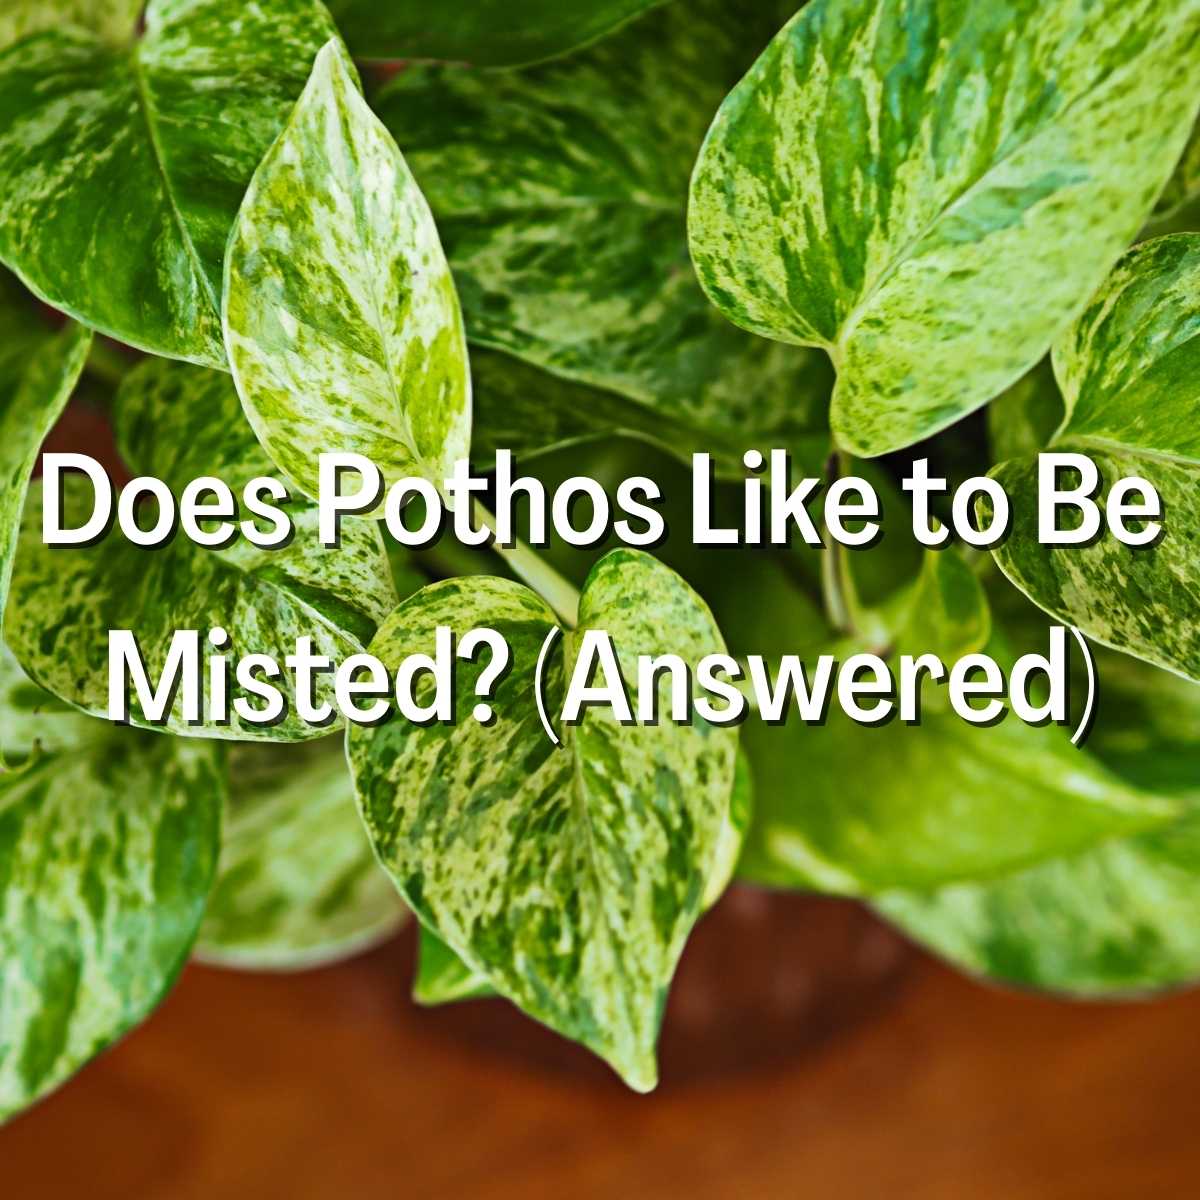 Does Pothos Like to Be Misted